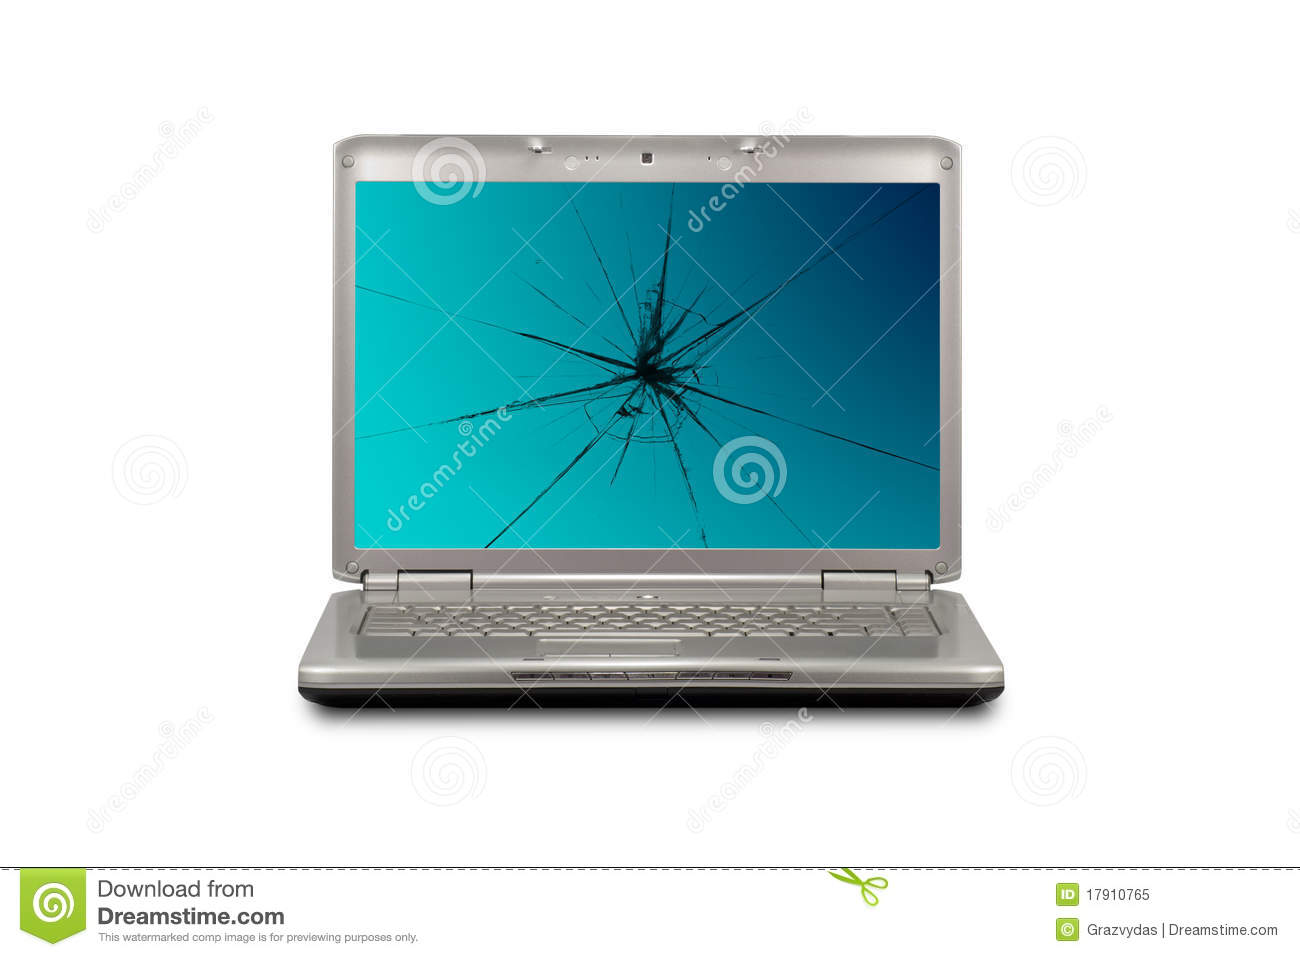 Computer With Damaged Screen Royalty Free Stock Photo   Image